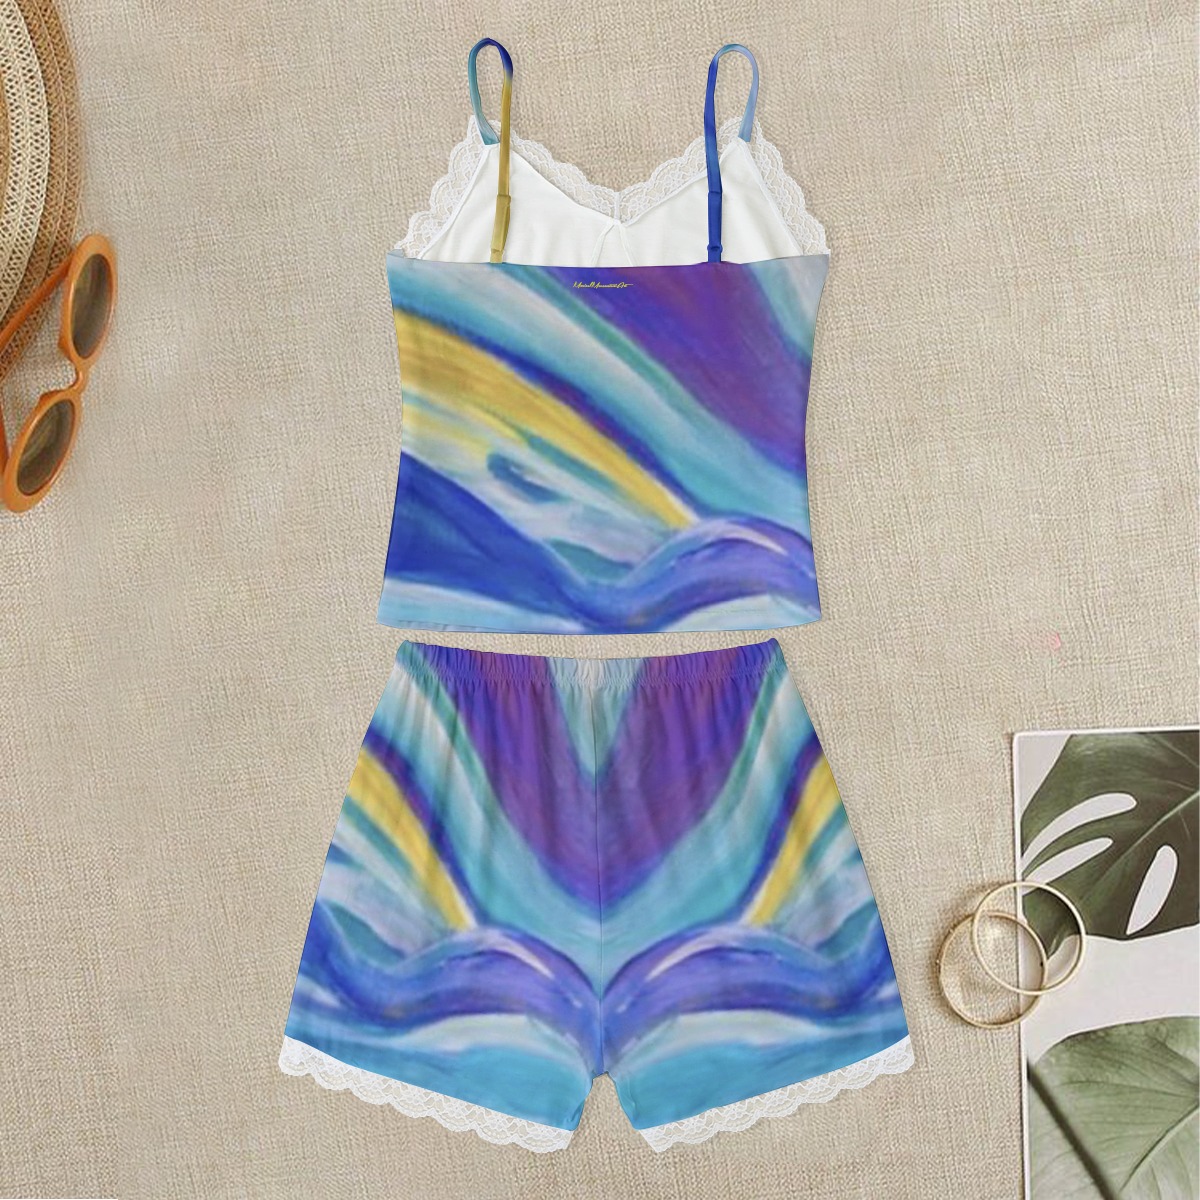 Women’s Cami Home Suit With Lace Edge Blue Skies Collection